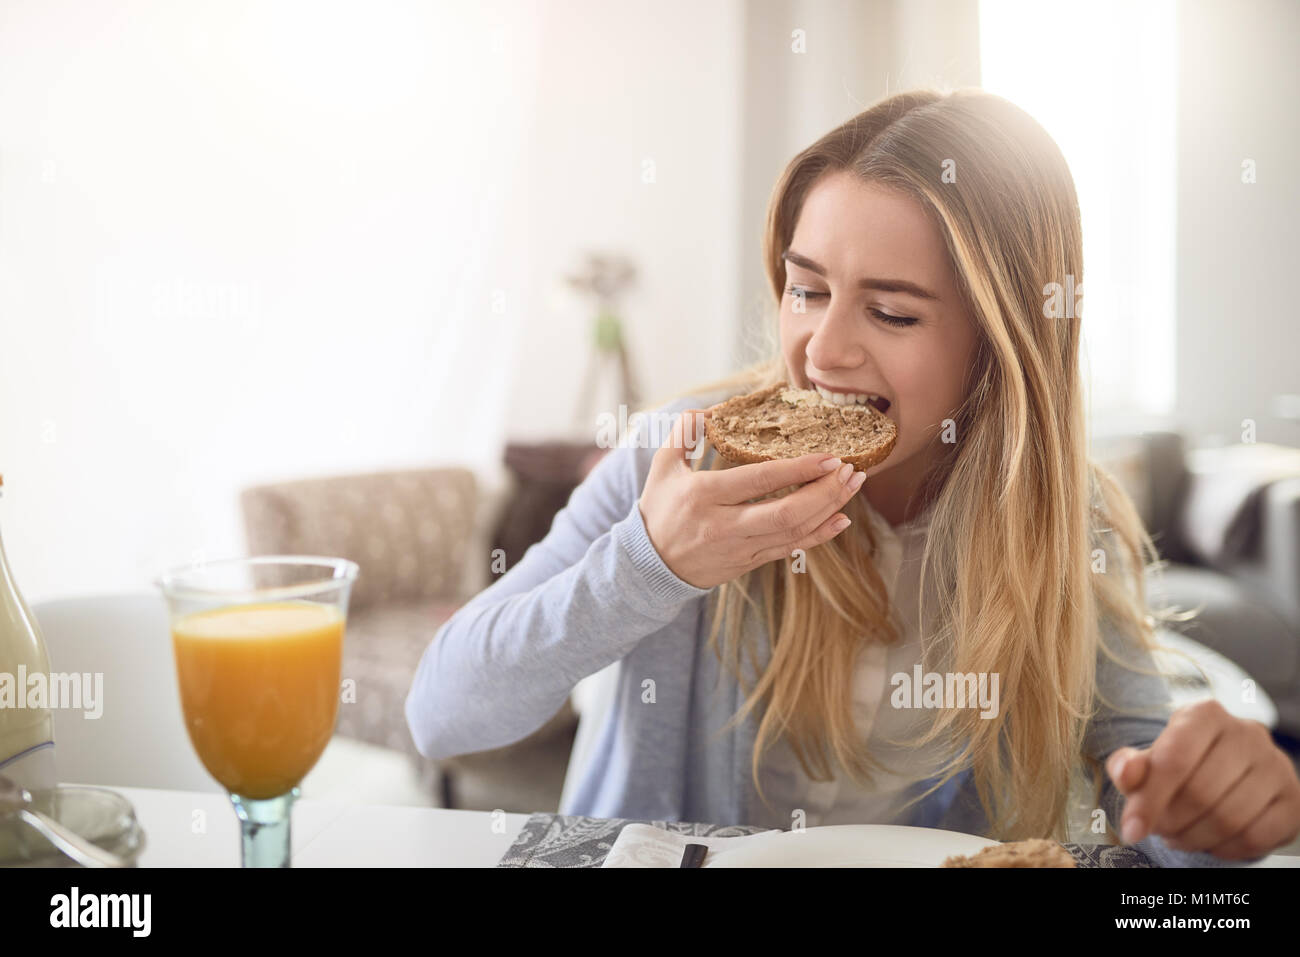 Pretty young teenage girl taking a bite of a healthy brown wholegrain roll as she enjoys a healthy breakfast at home with a glass of fresh orange juic Stock Photo